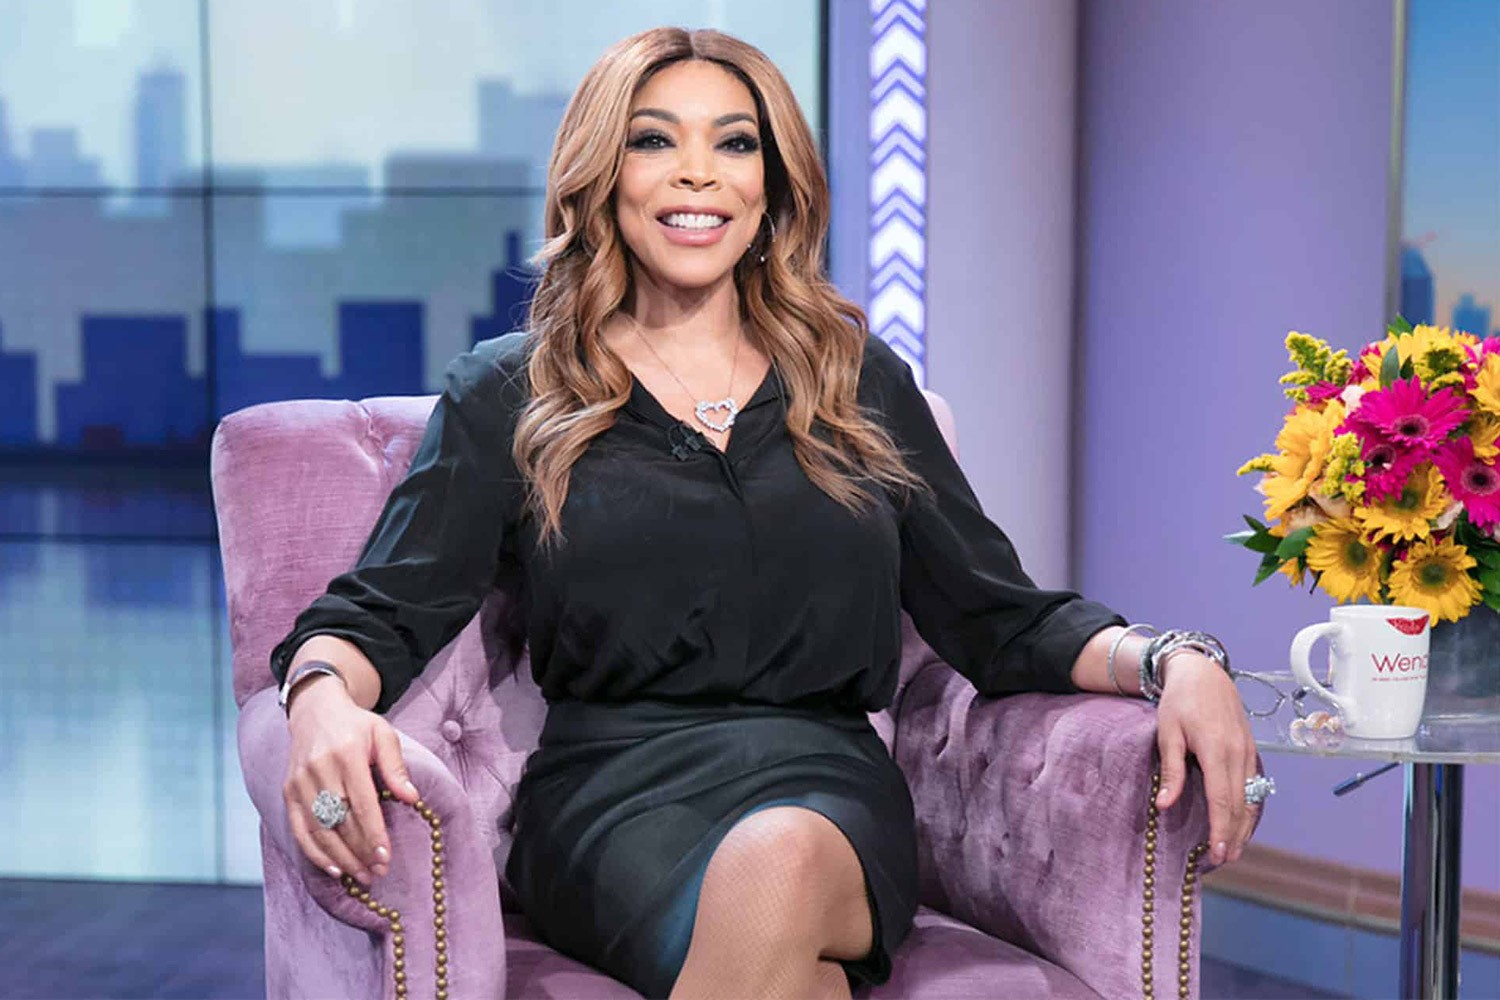 Wendy Williams is Going Through a "Terrible" Time being Single! The